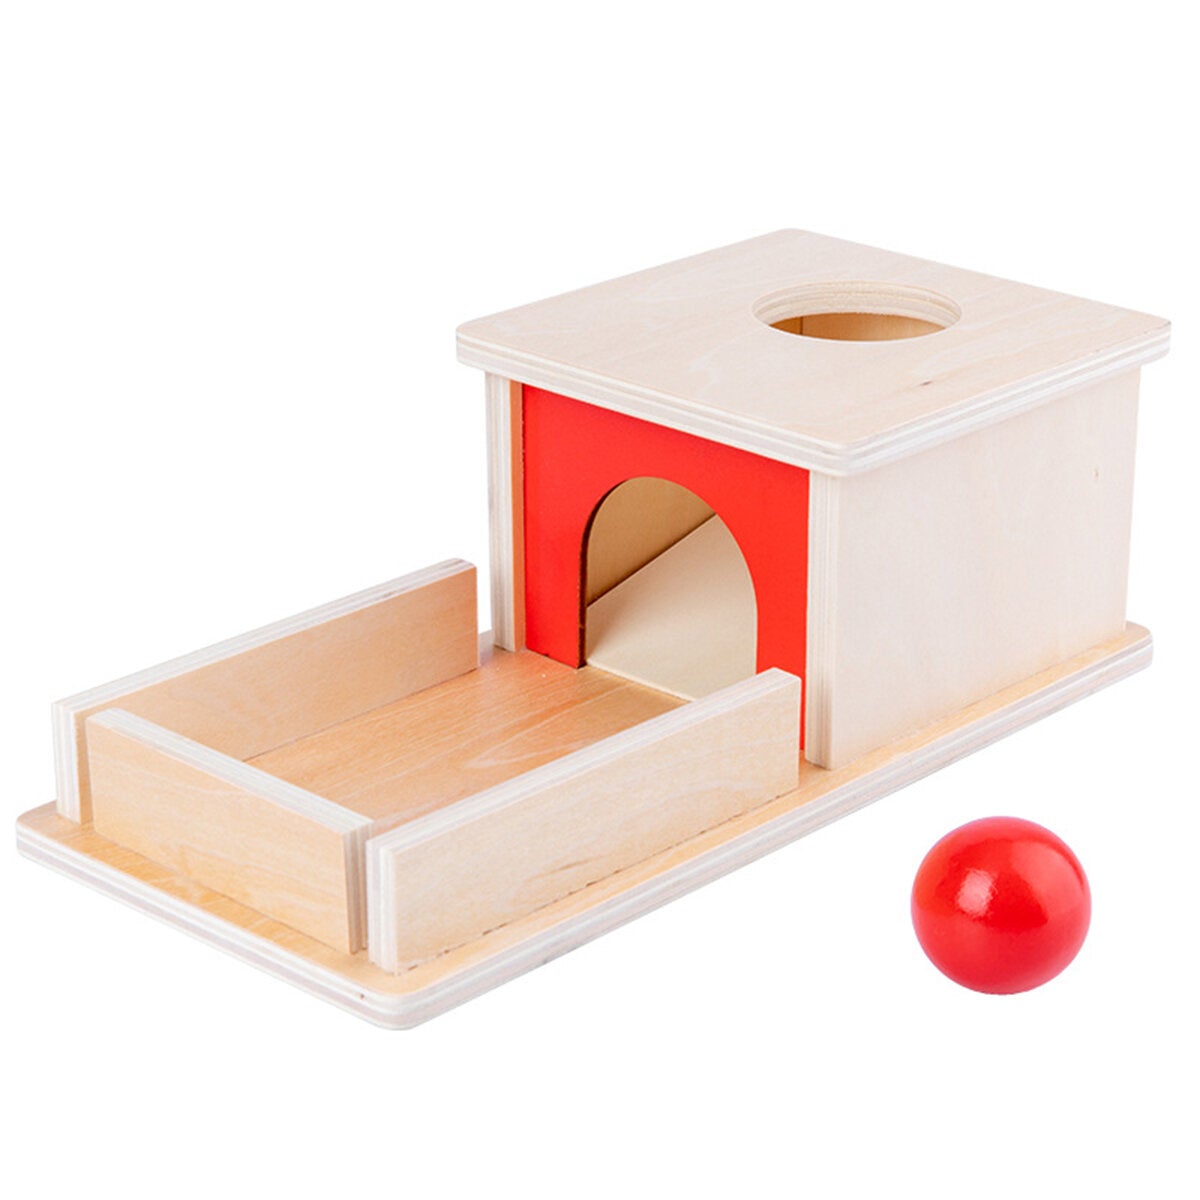 Montessori Object Permanence Box Wooden Permanent Box Practical Learning Educational Toy for Kids Gift